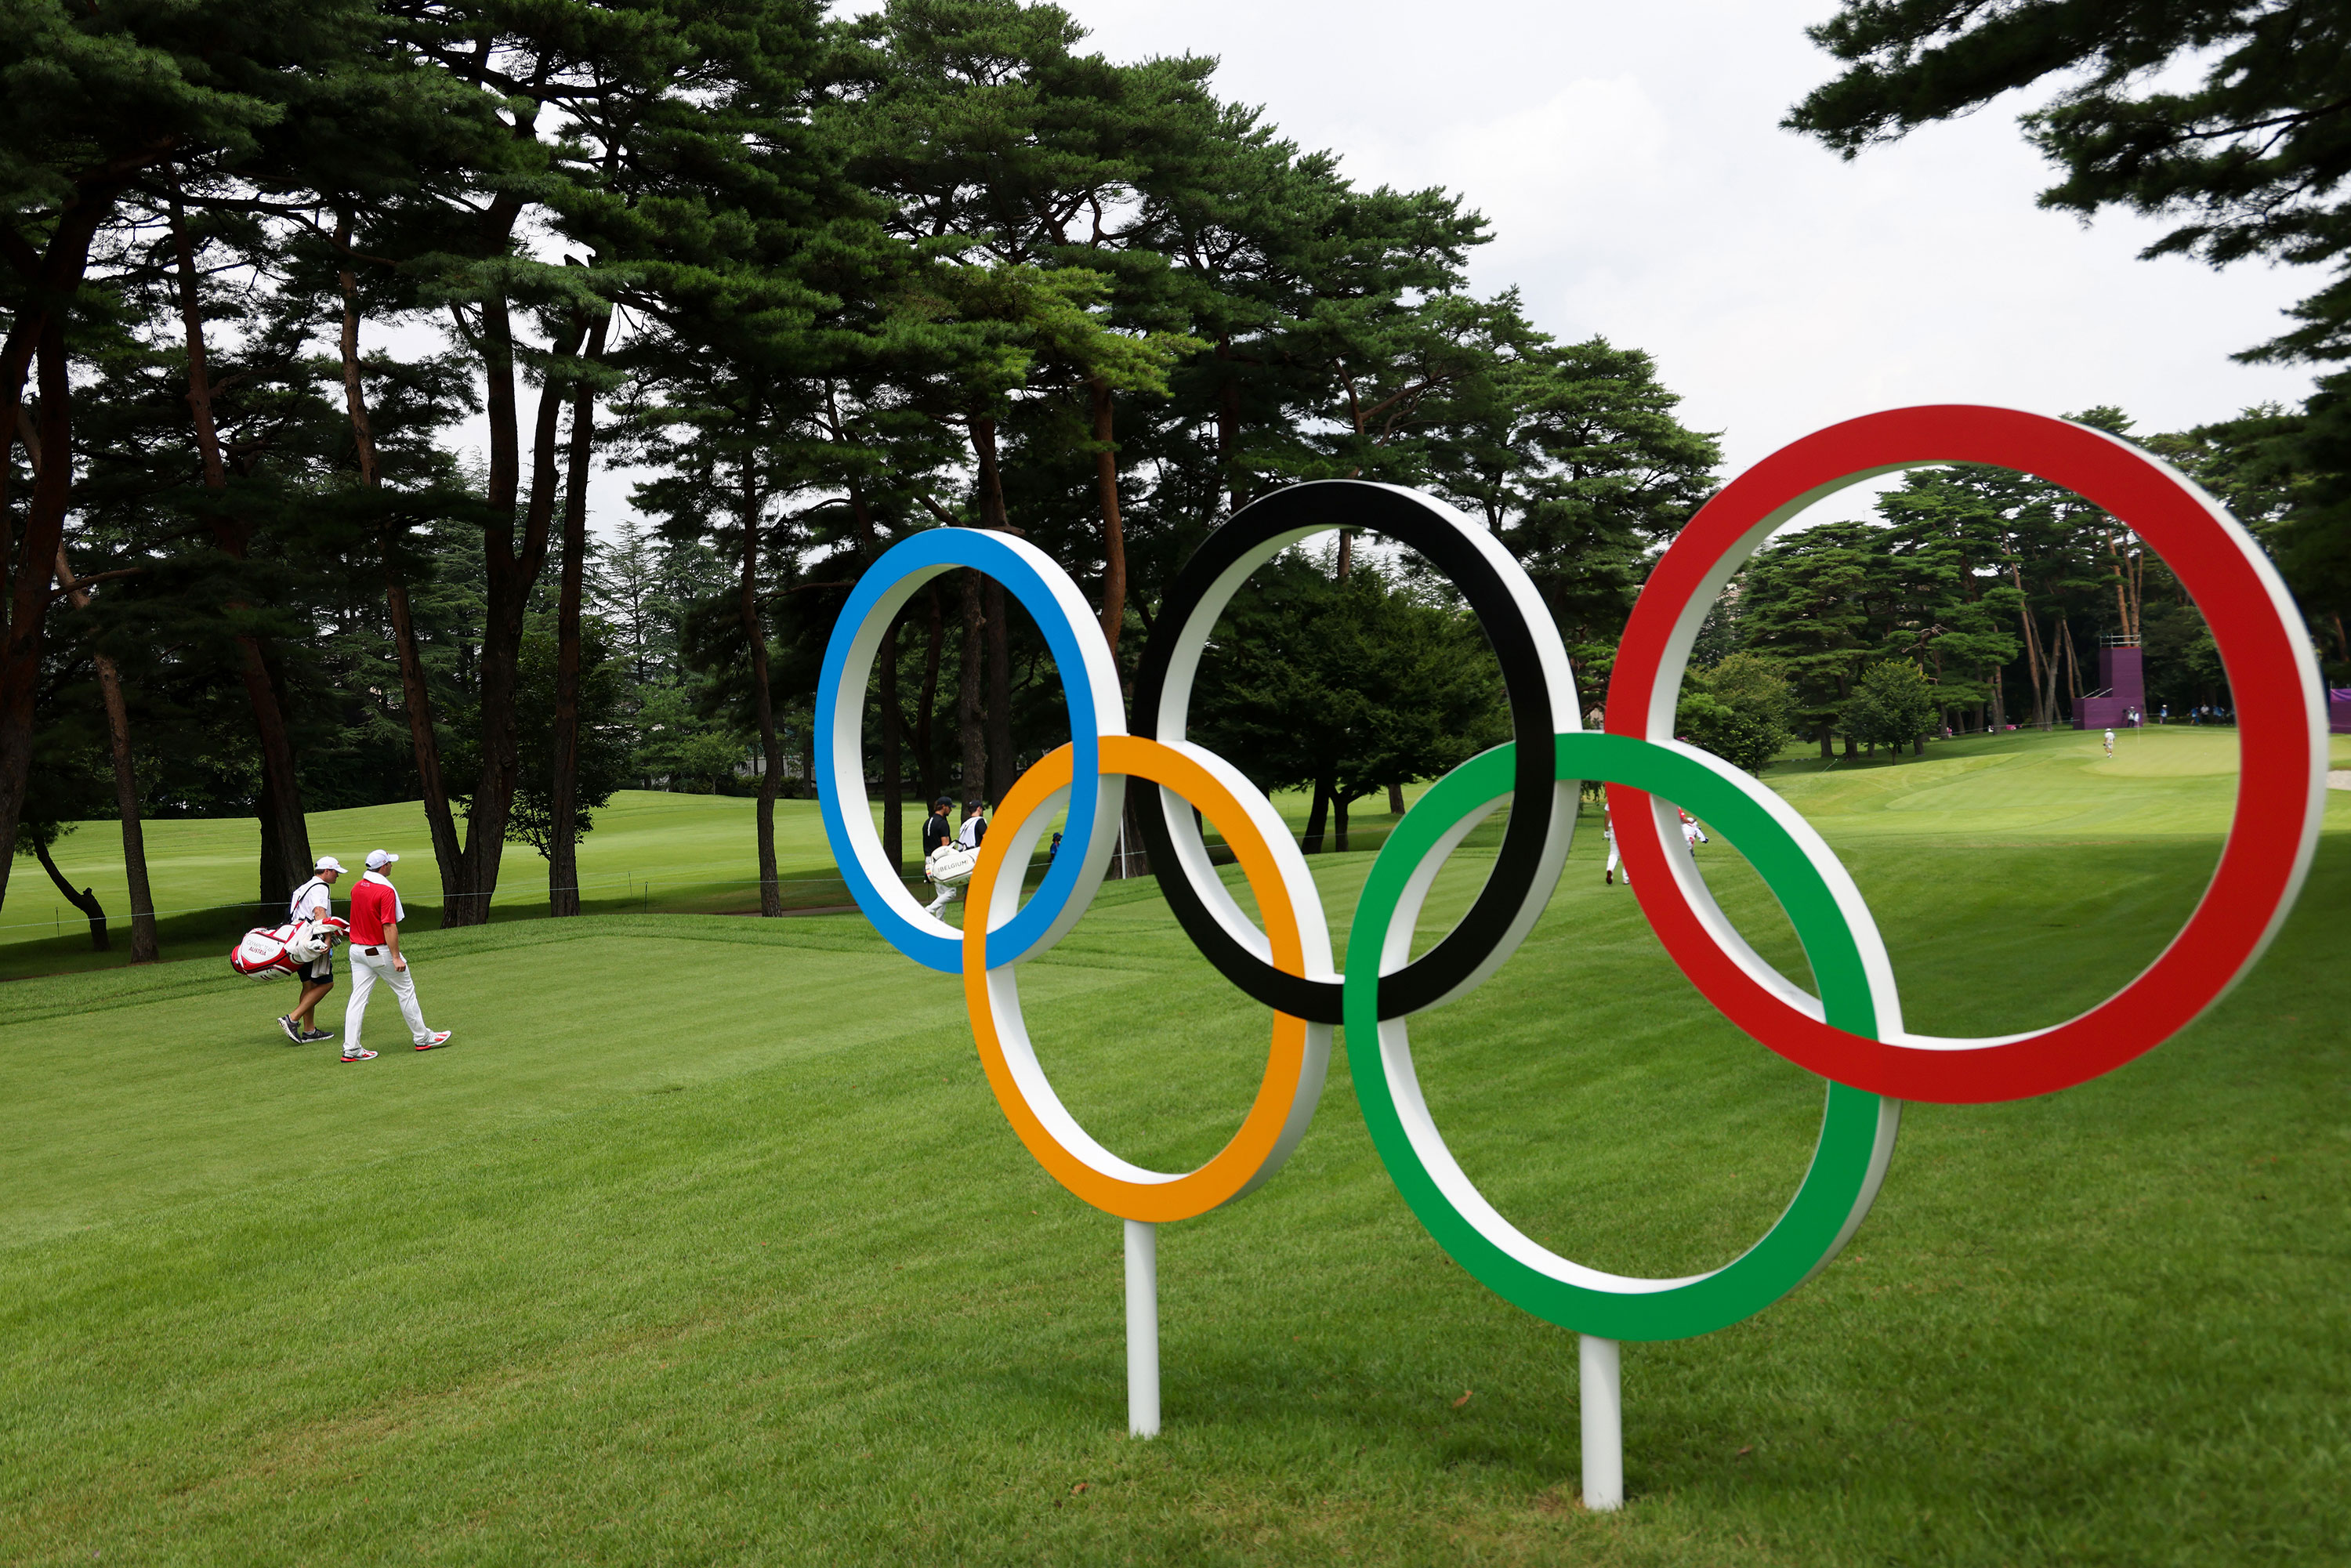 Australia's Sepp Straka and caddie Samuel Straka walk by Olympic rings on the 16th hole during the first round of the individual stroke play in Kawagoe, Japan, on July 29.